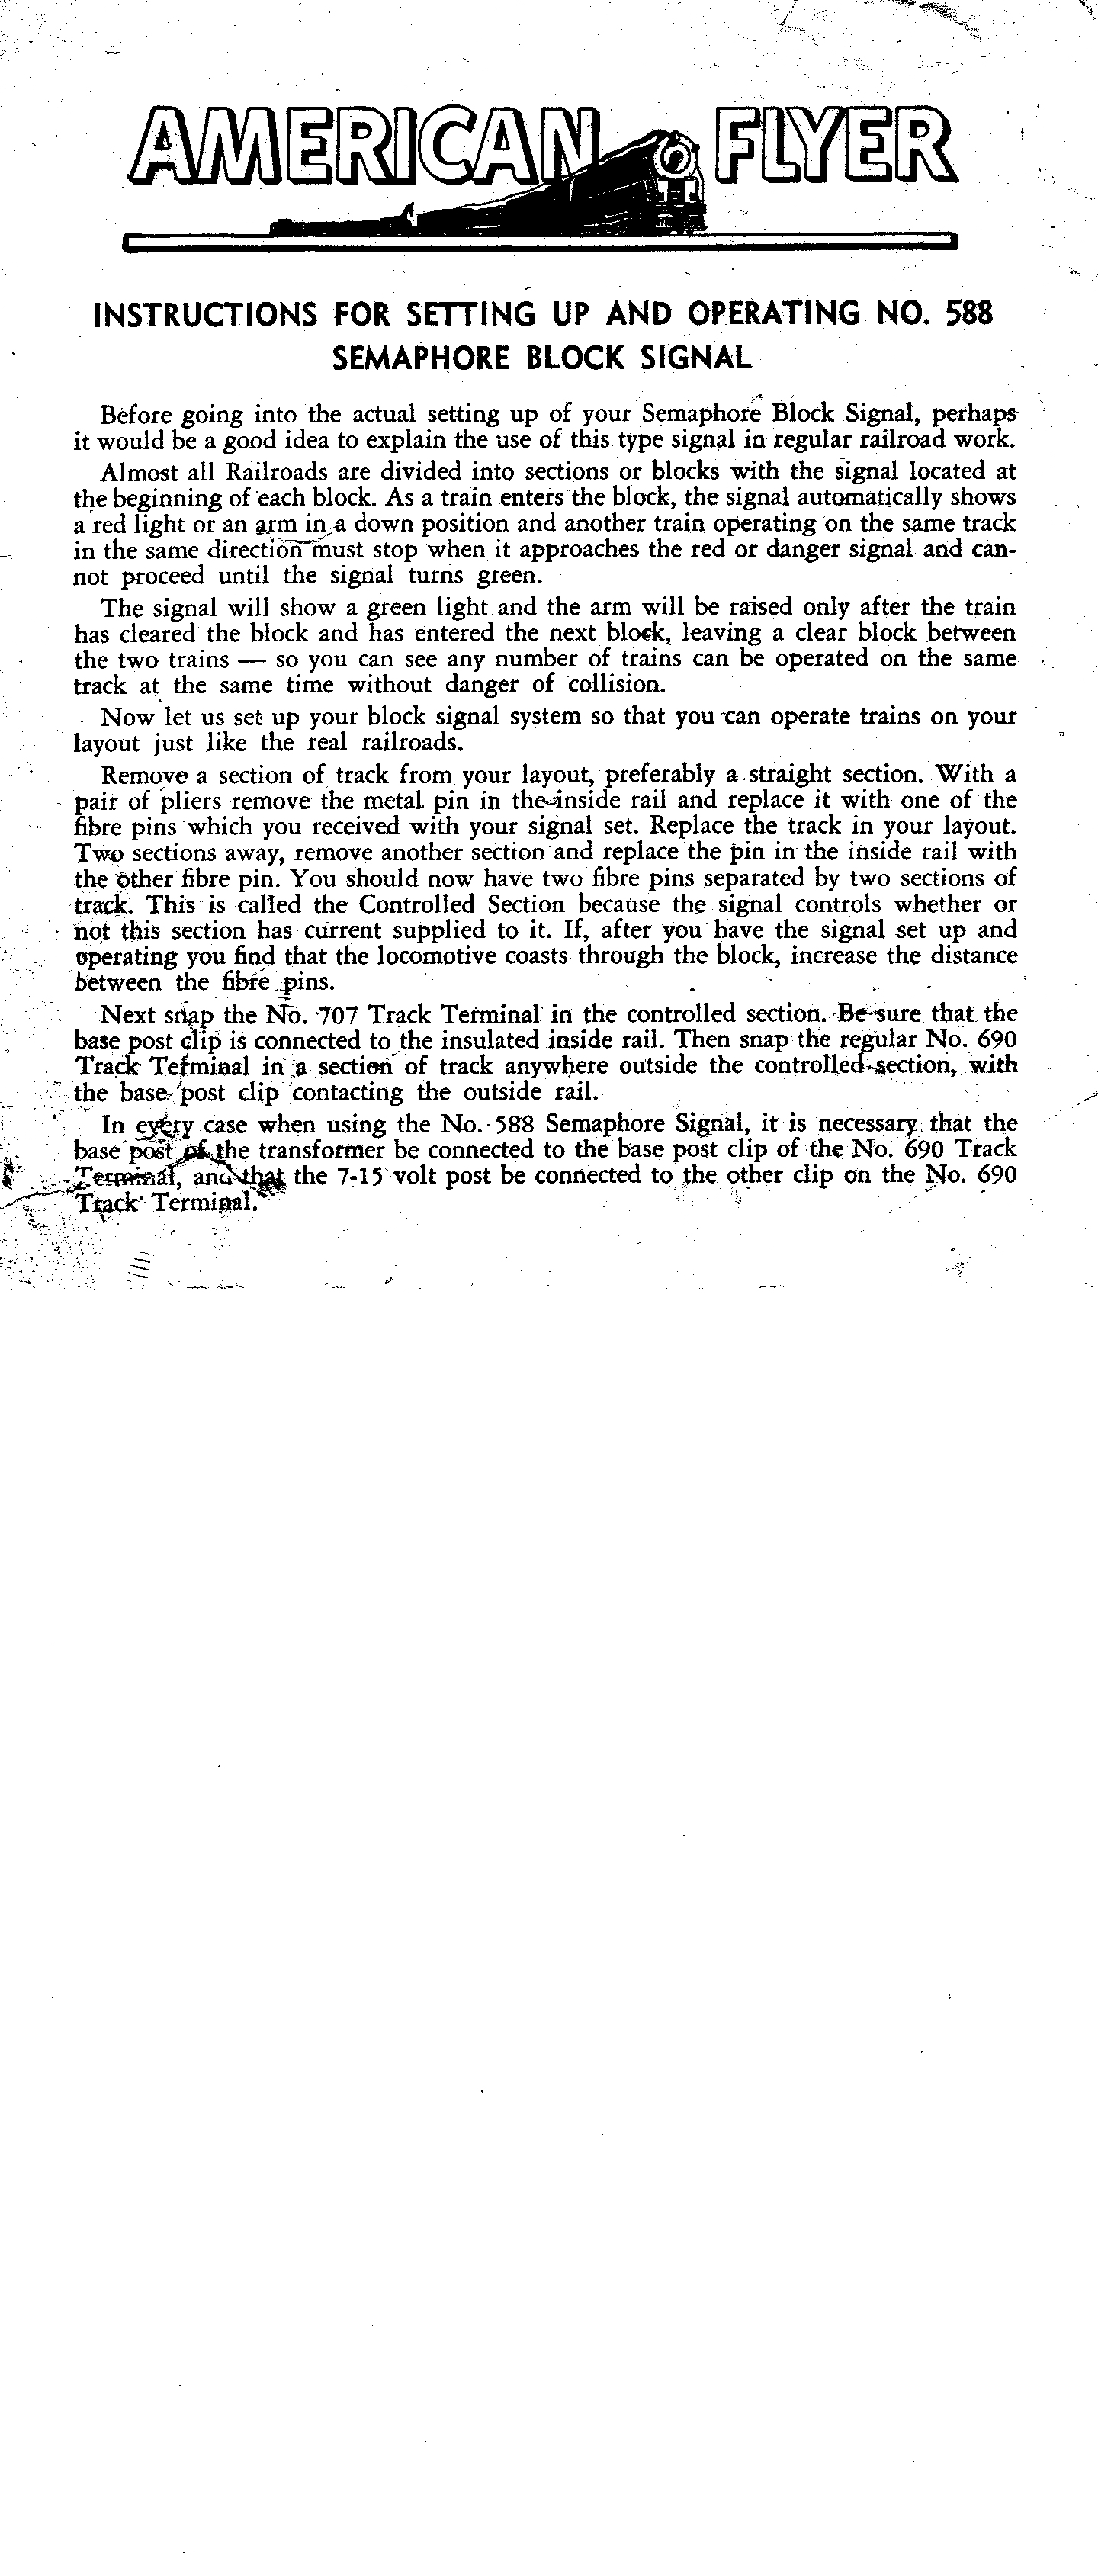 Instructions for Setting Up and Operating No. 588 Semaphore Block Signal - Page 1